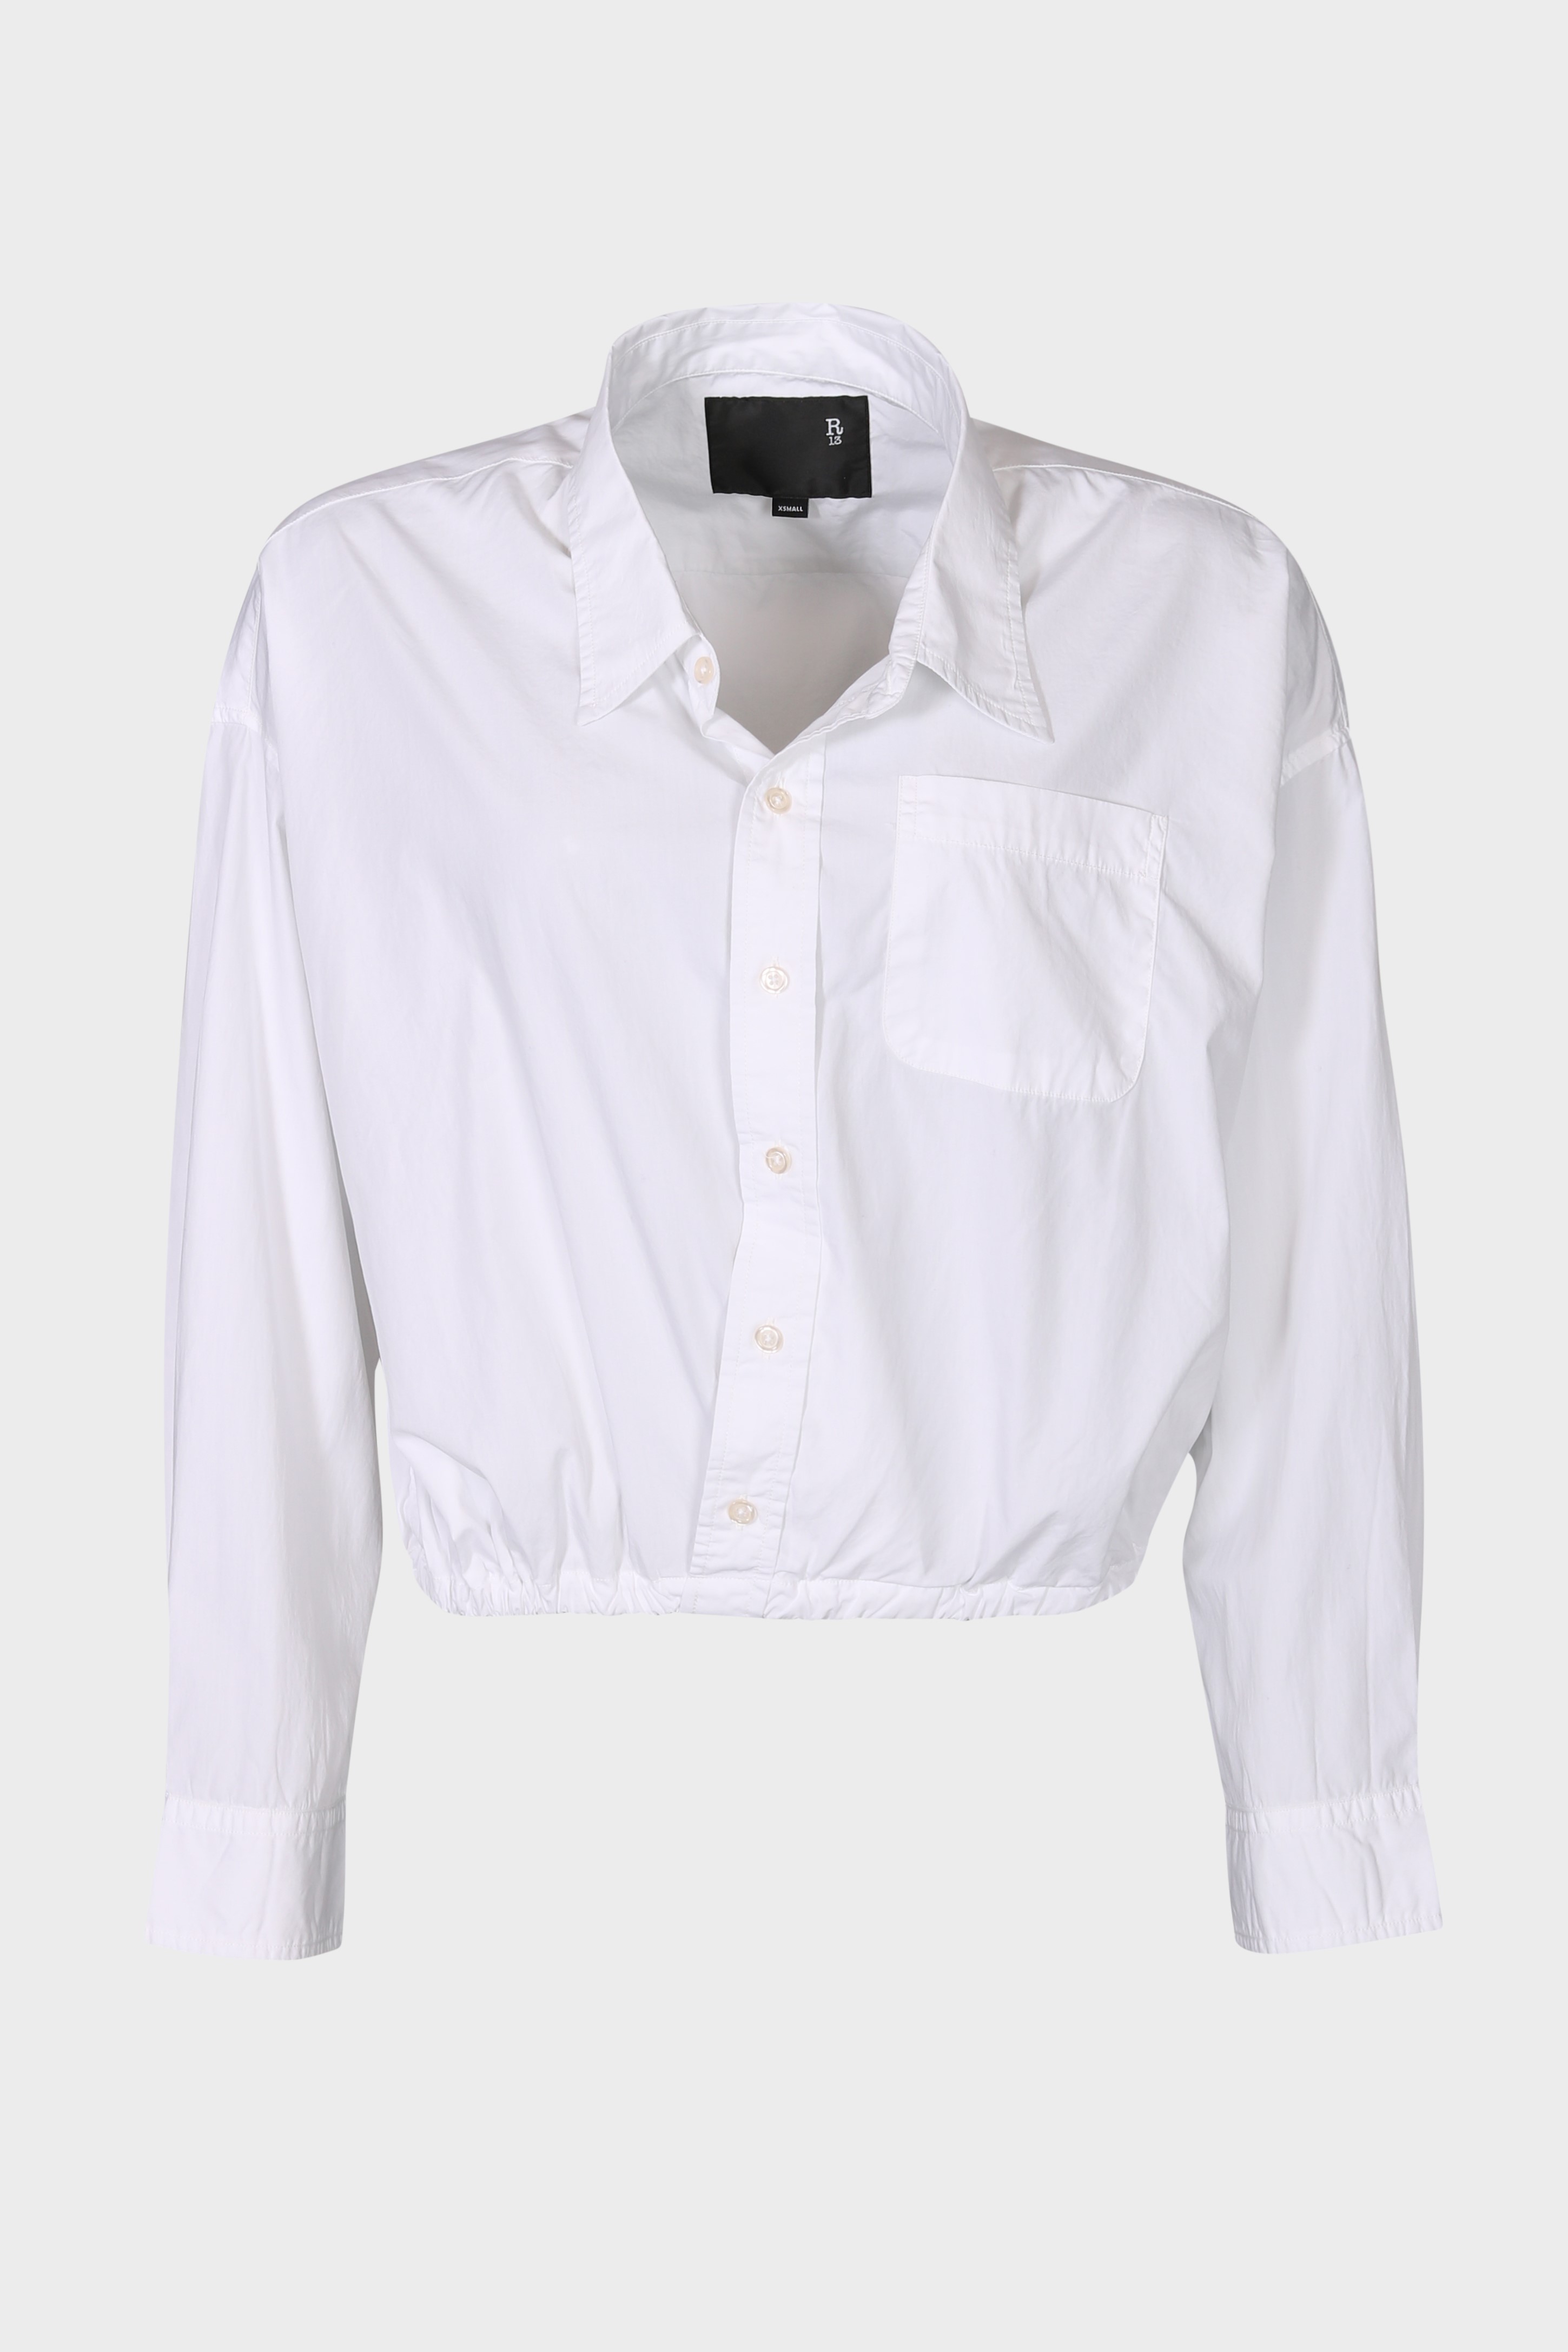 R13 Crossover Bubble Shirt in White